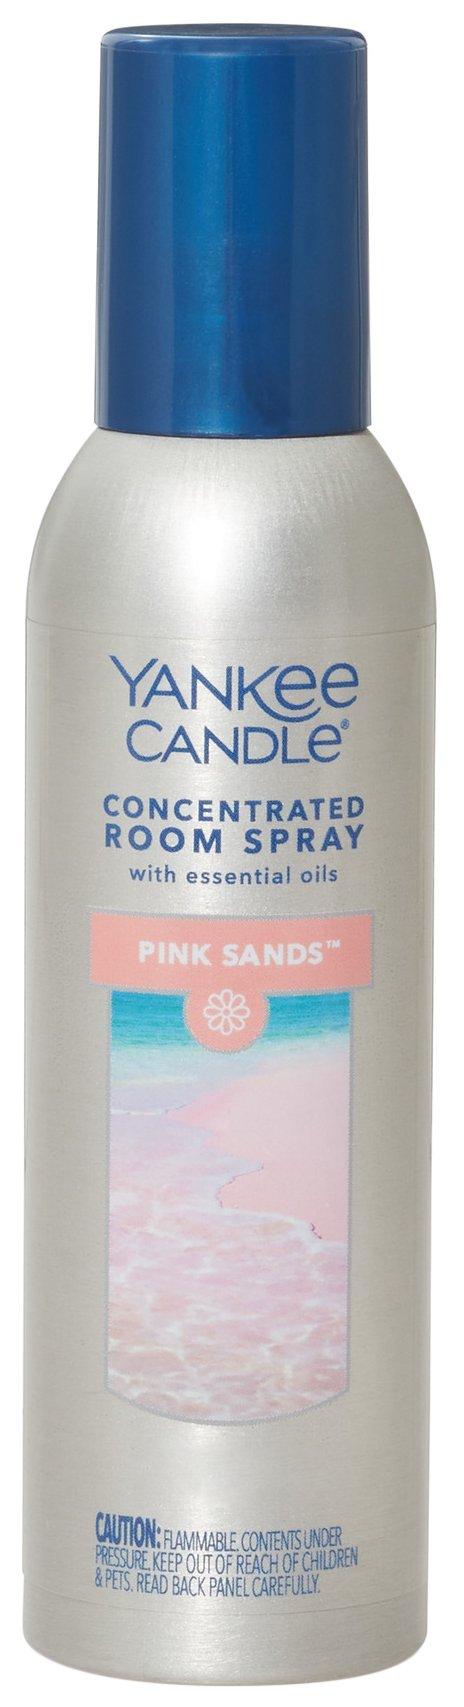 Yankee Candle Pink Sands Concentrated Room Spray